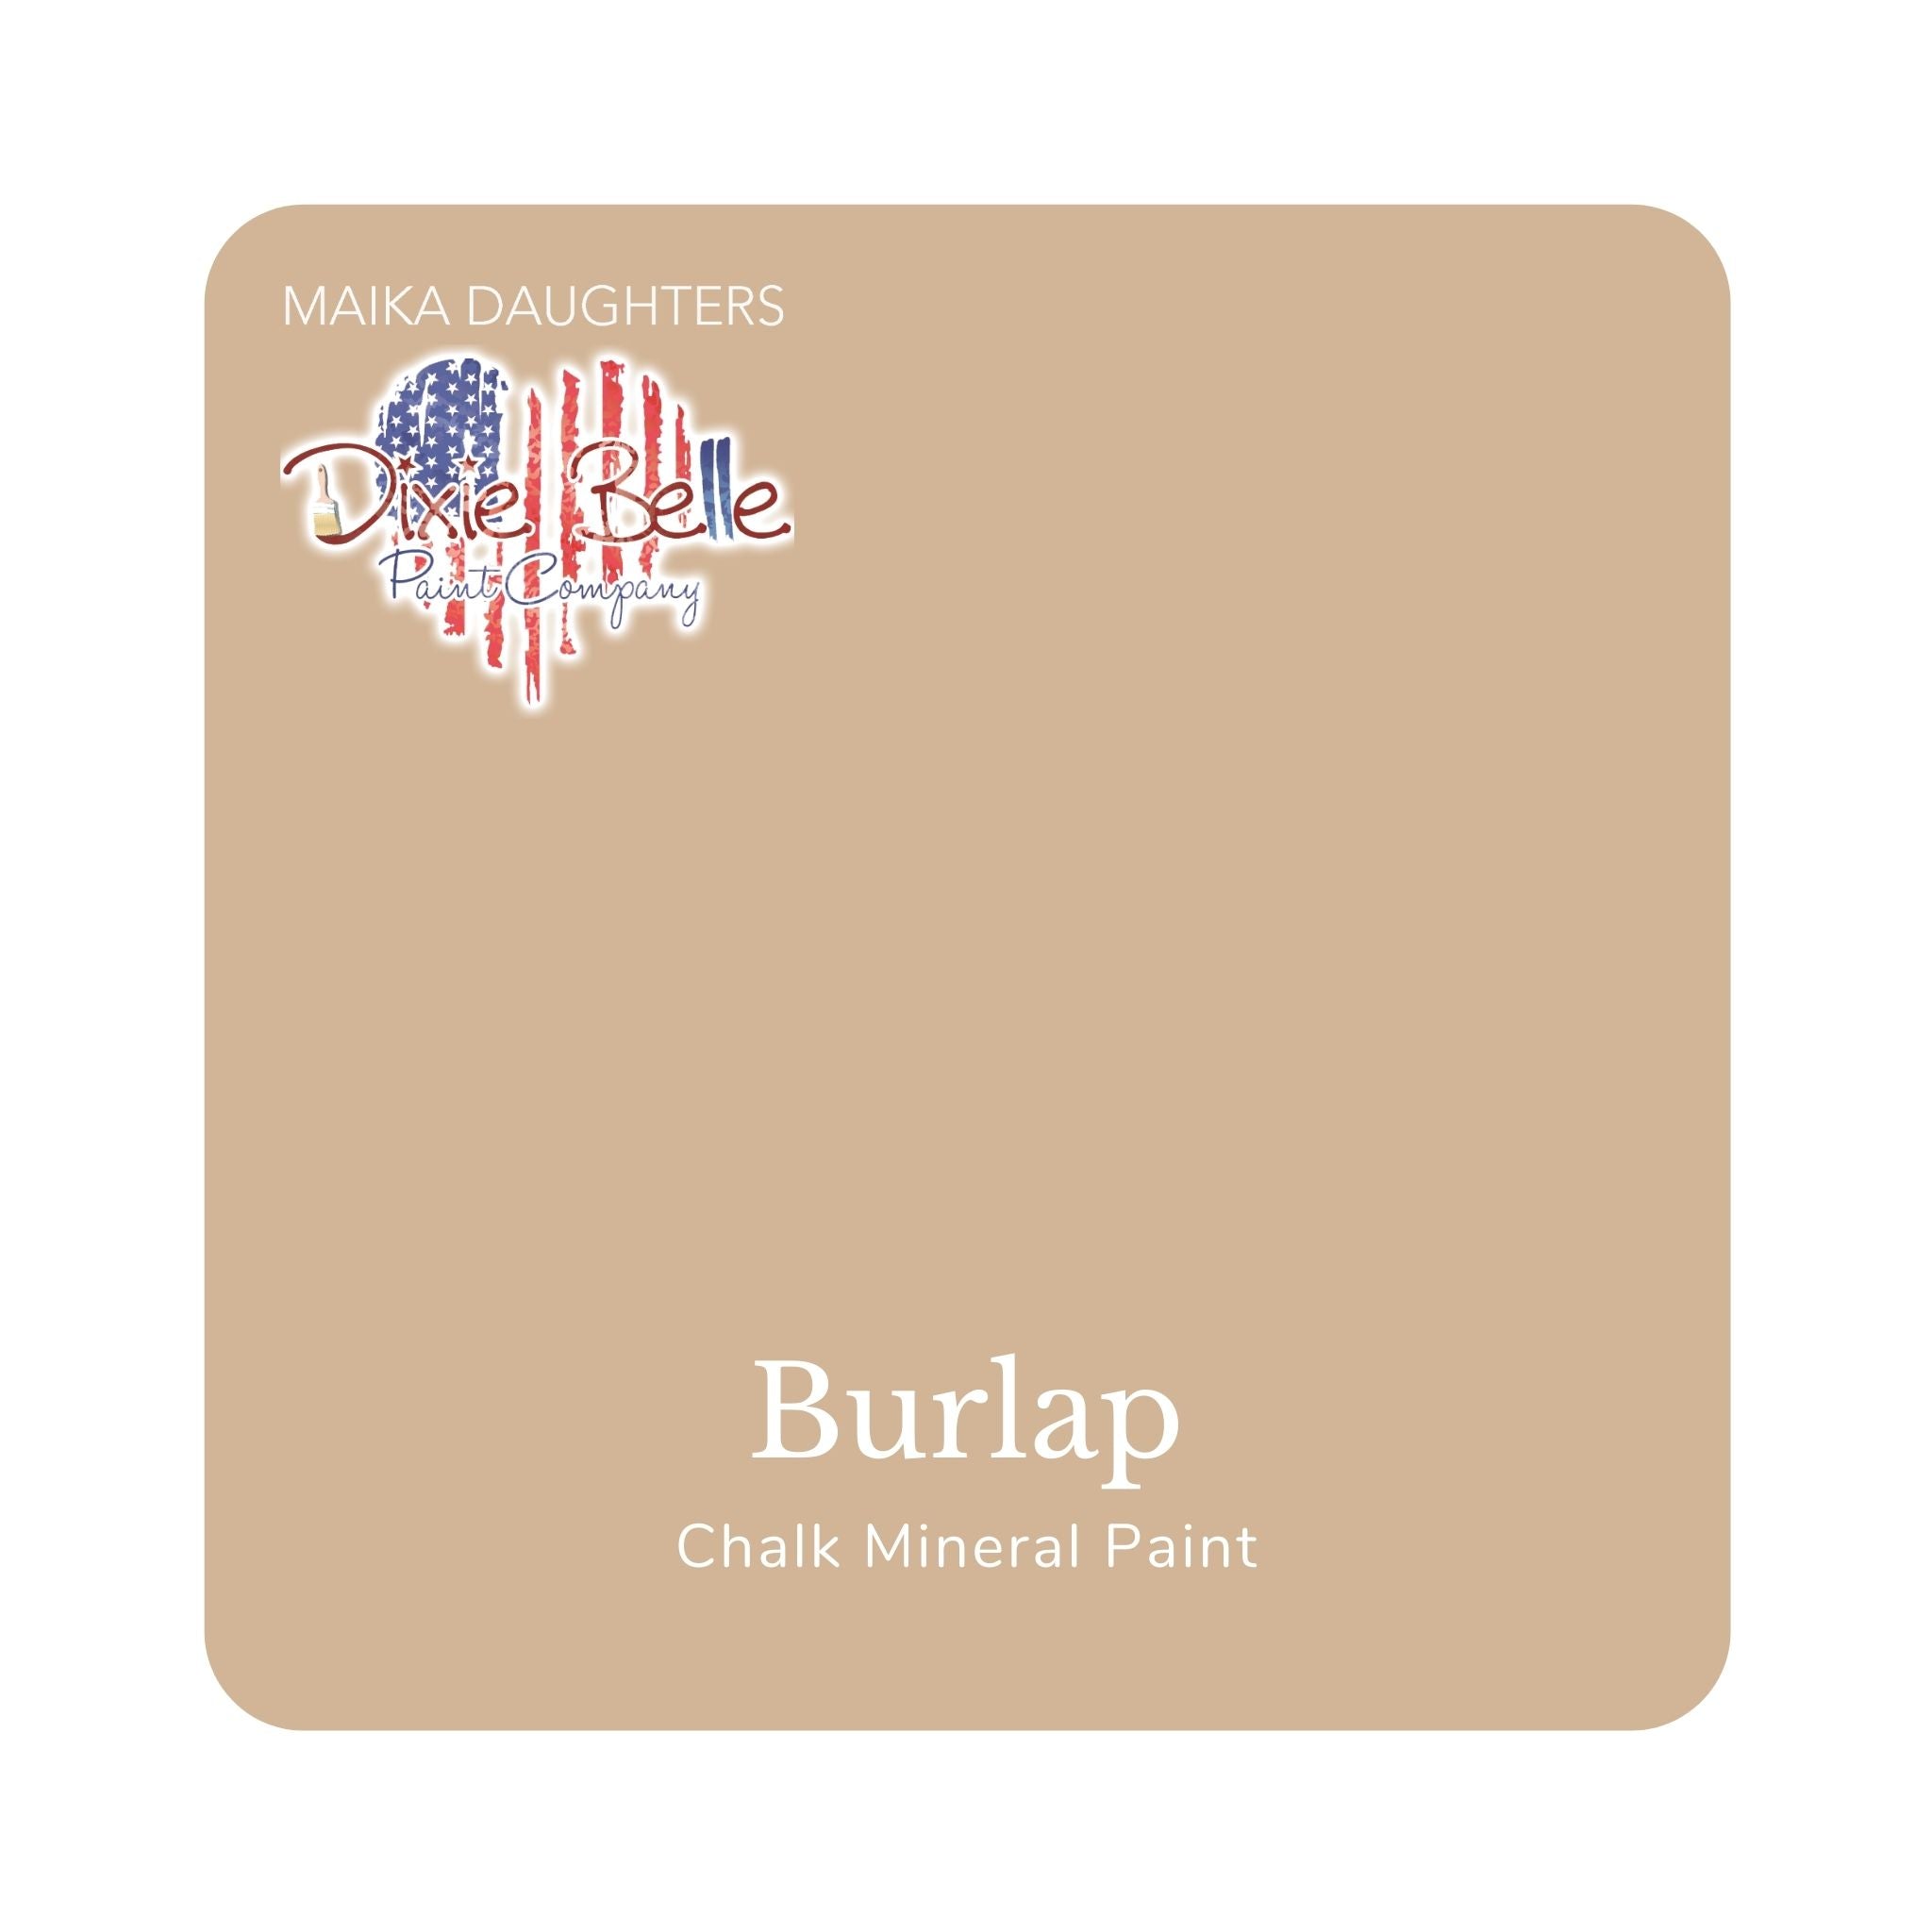 A square swatch card of Dixie Belle Paint Company’s Burlap Chalk Mineral Paint. This color is a soft yellow with orange-brown undertones.